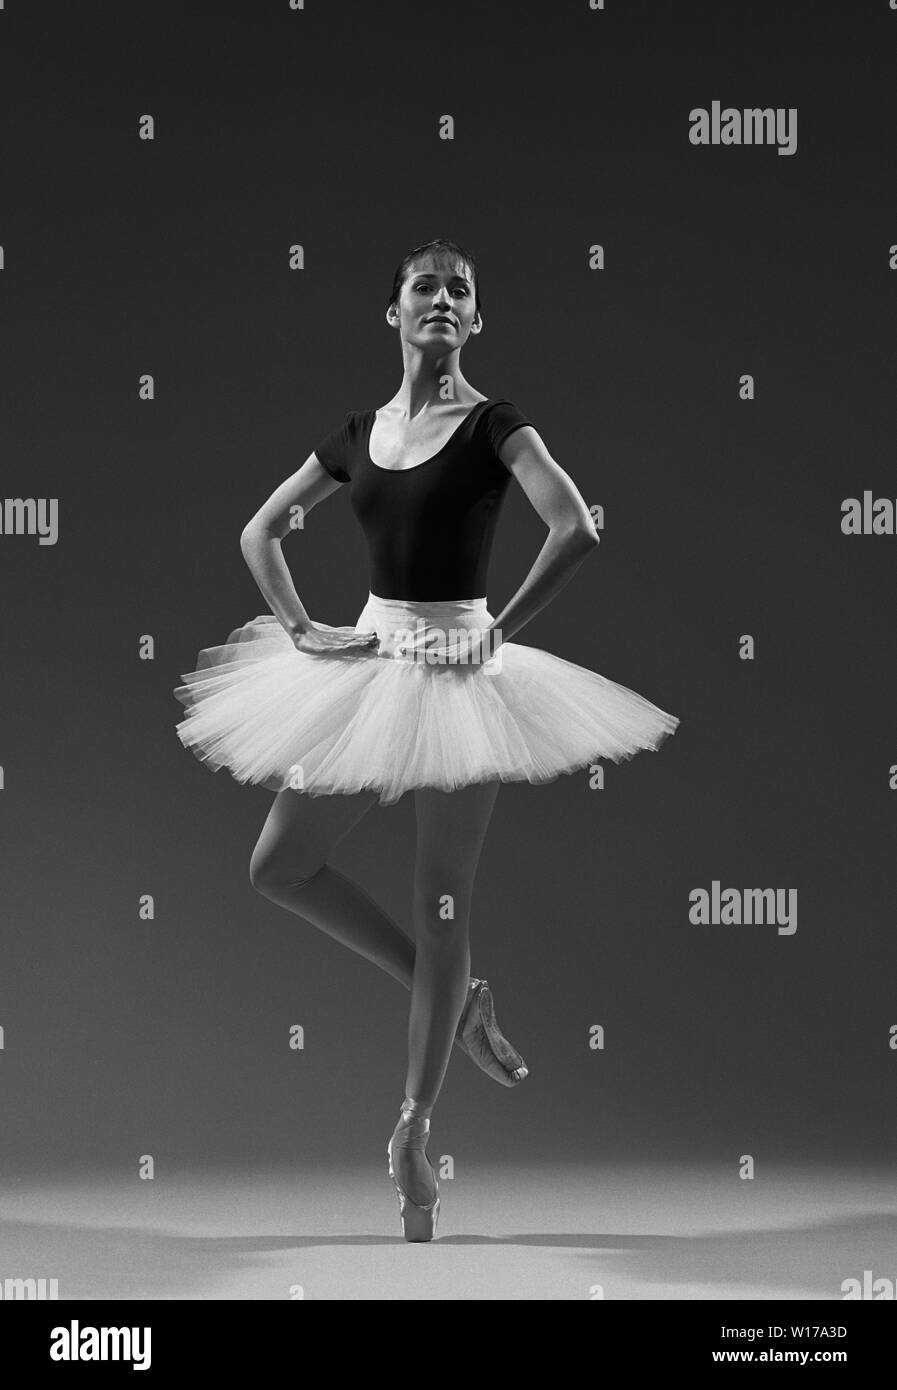 Professional ballerina in various ballet positions and stretches. Stock Photo